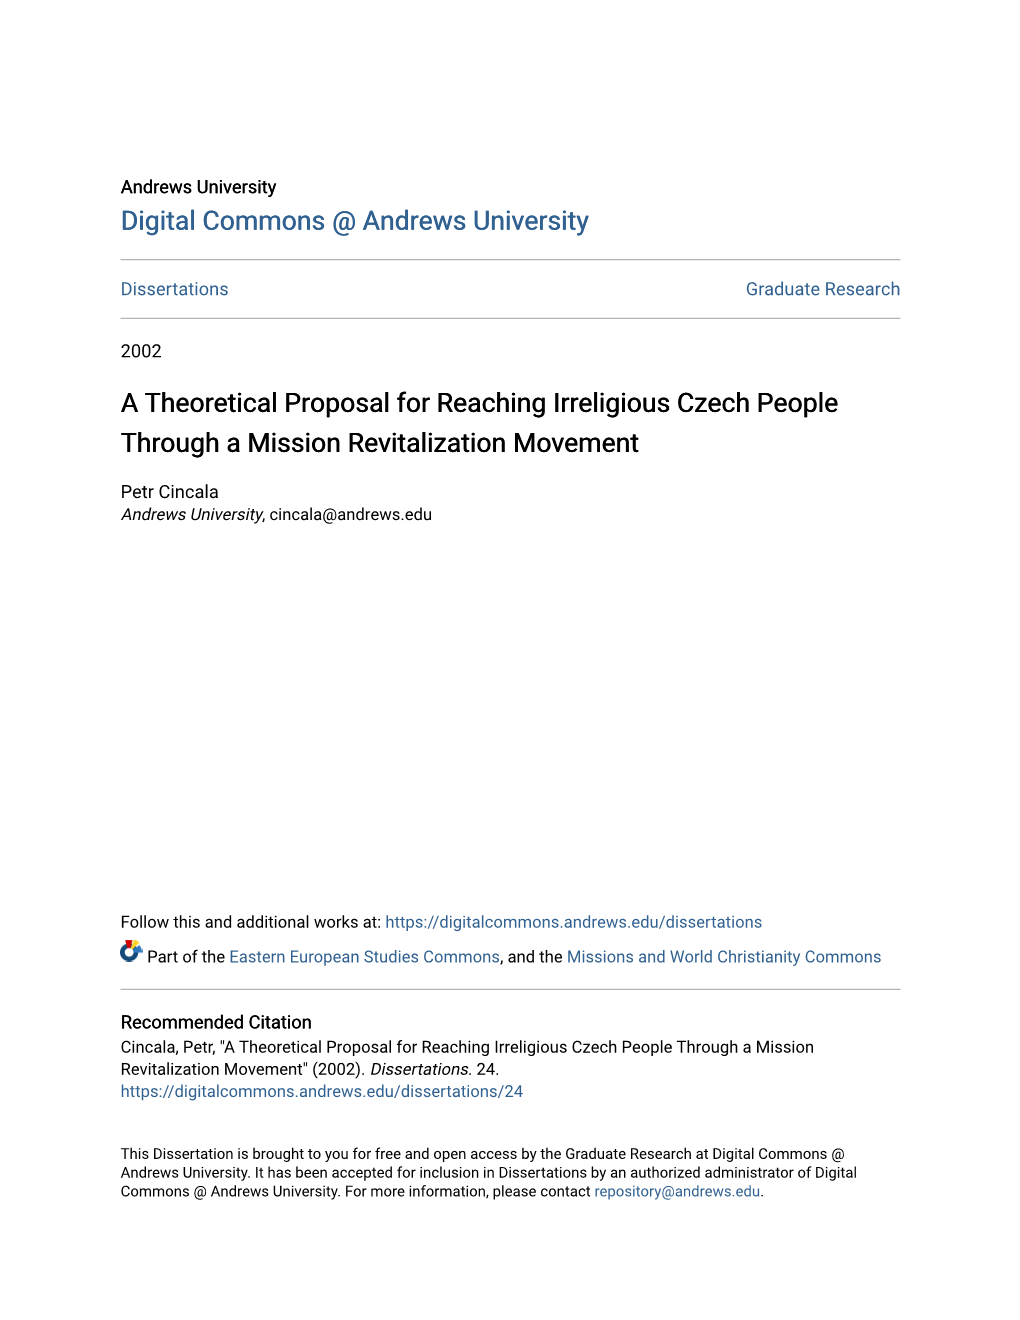 A Theoretical Proposal for Reaching Irreligious Czech People Through a Mission Revitalization Movement